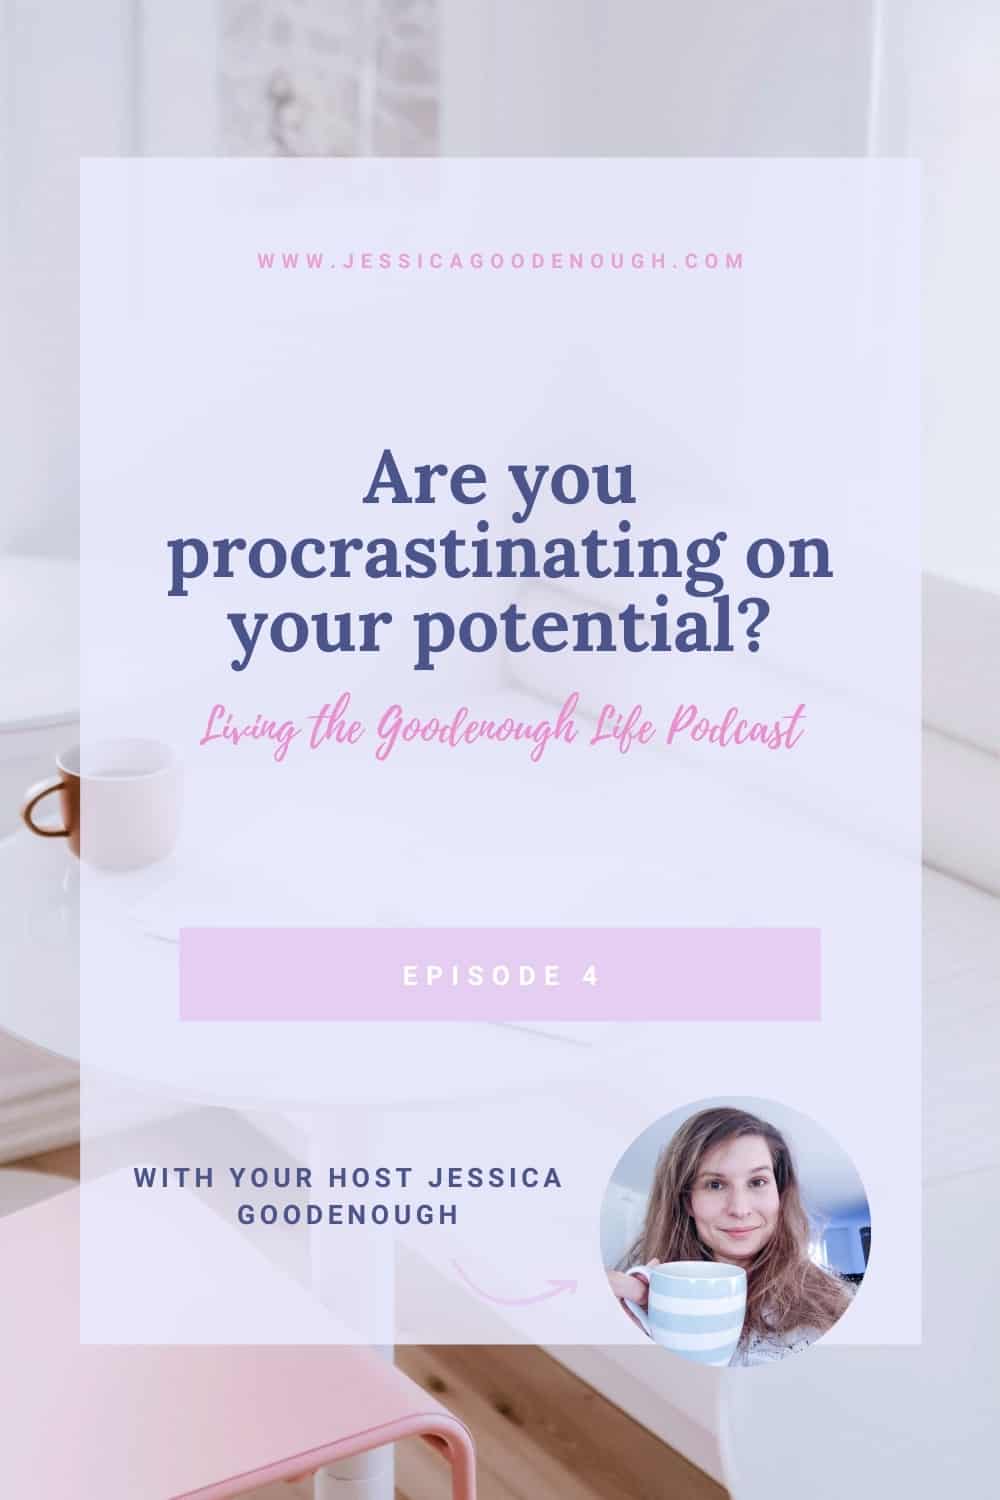 Are you procrastinating on your potential? In this episode, I invite you to reflect on how you might be sabotaging your efforts towards your goal(s). But we're doing it in a compassionate way! This podcast episode comes with a free workbook to gain more clarity on your thoughts and then move on and start following through with your plans!